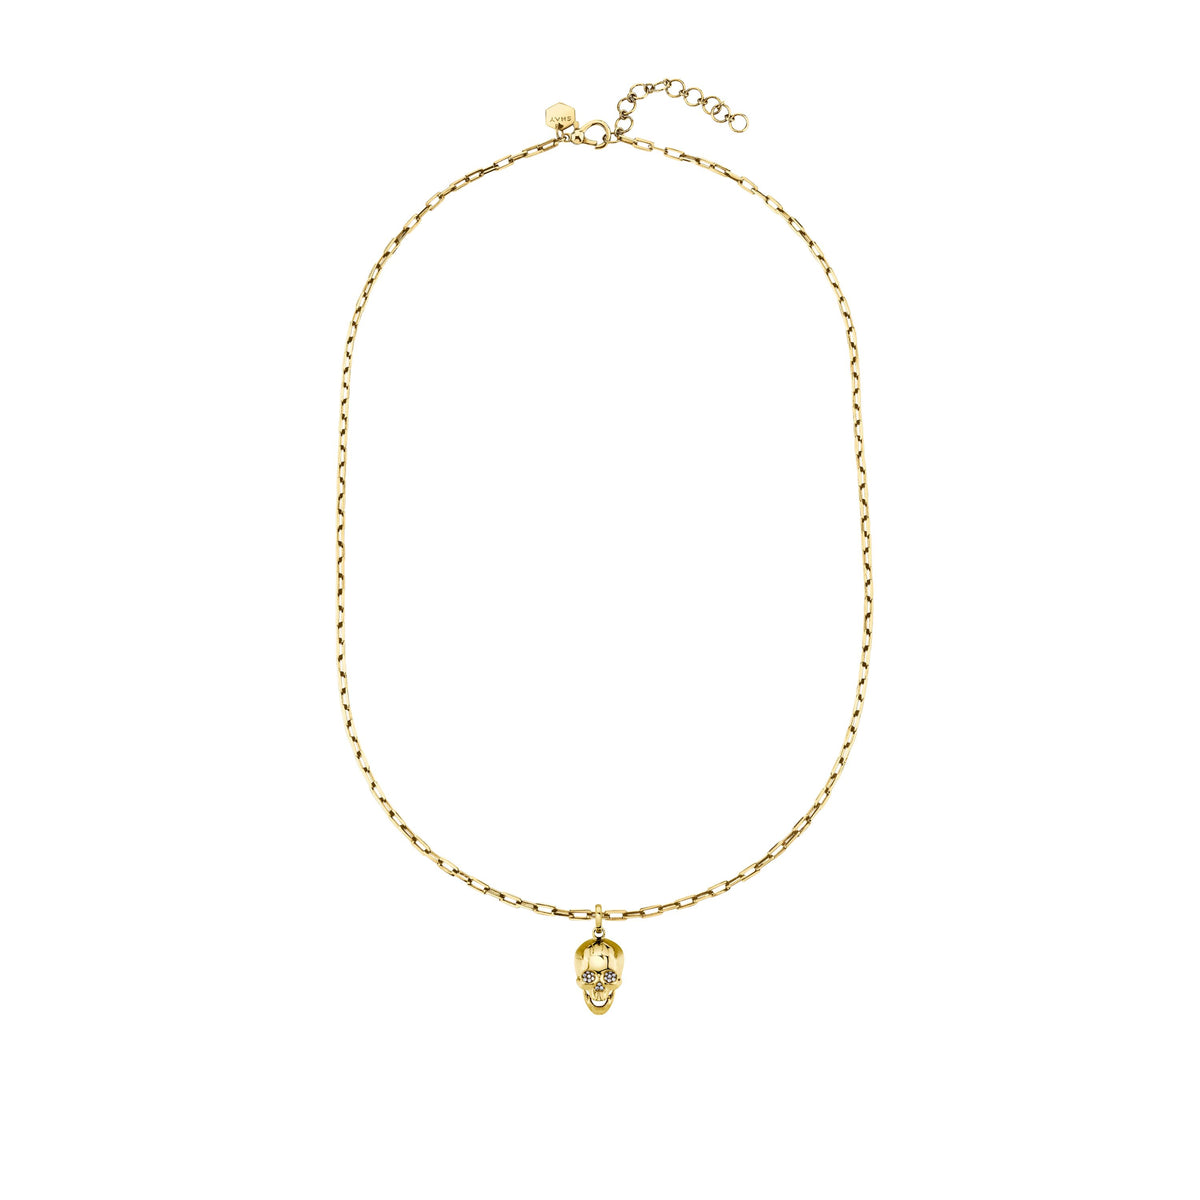 SOLID GOLD SKULL PENDANT NECKLACE